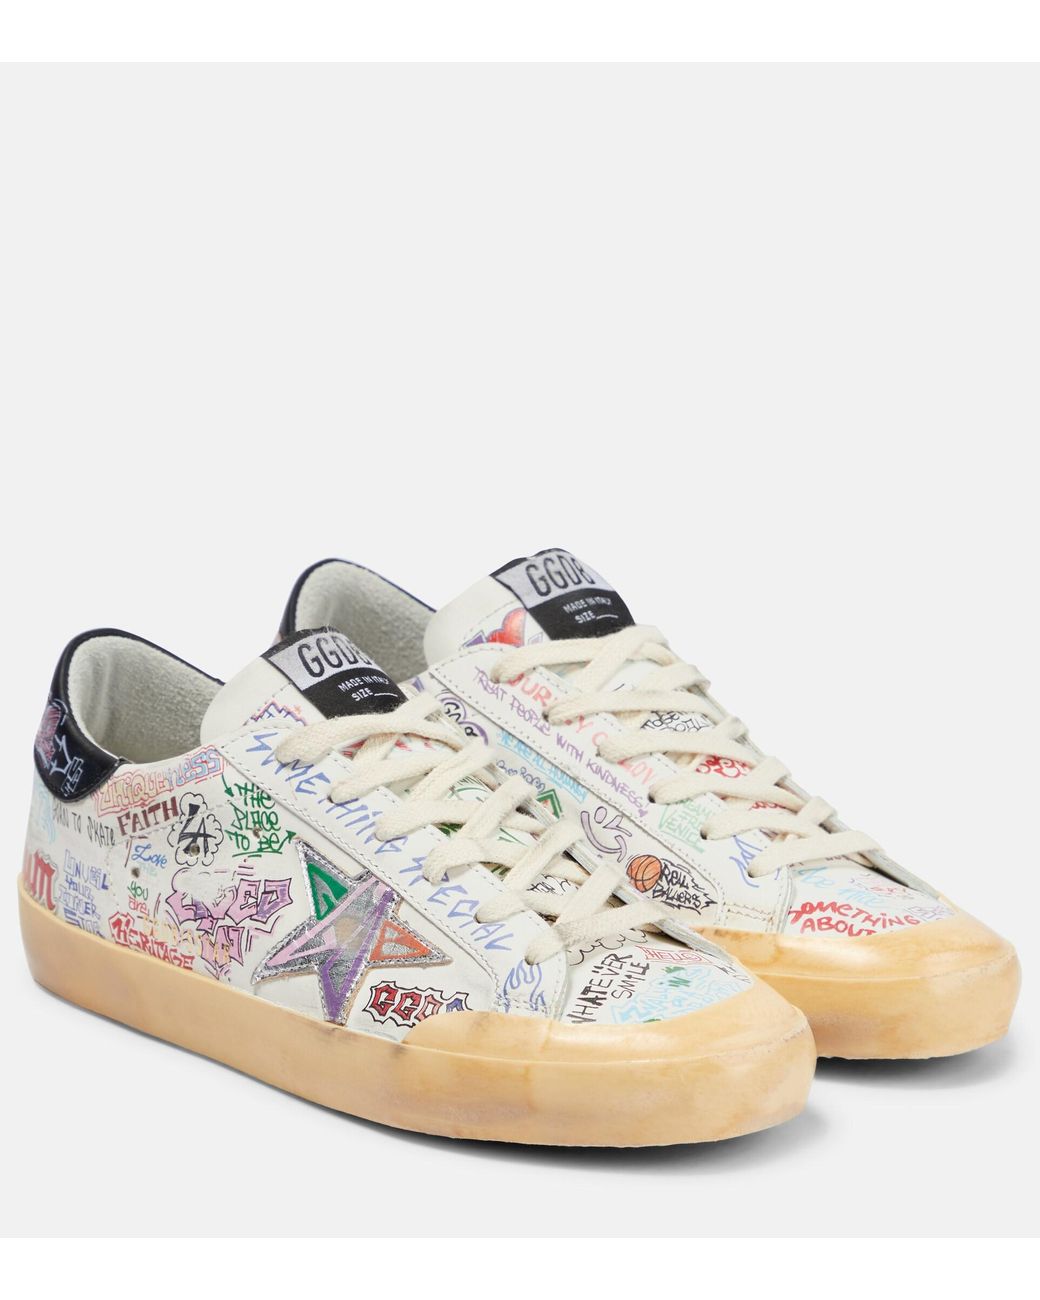 Golden Goose Super-star Penstar Leather Sneakers in White | Lyst